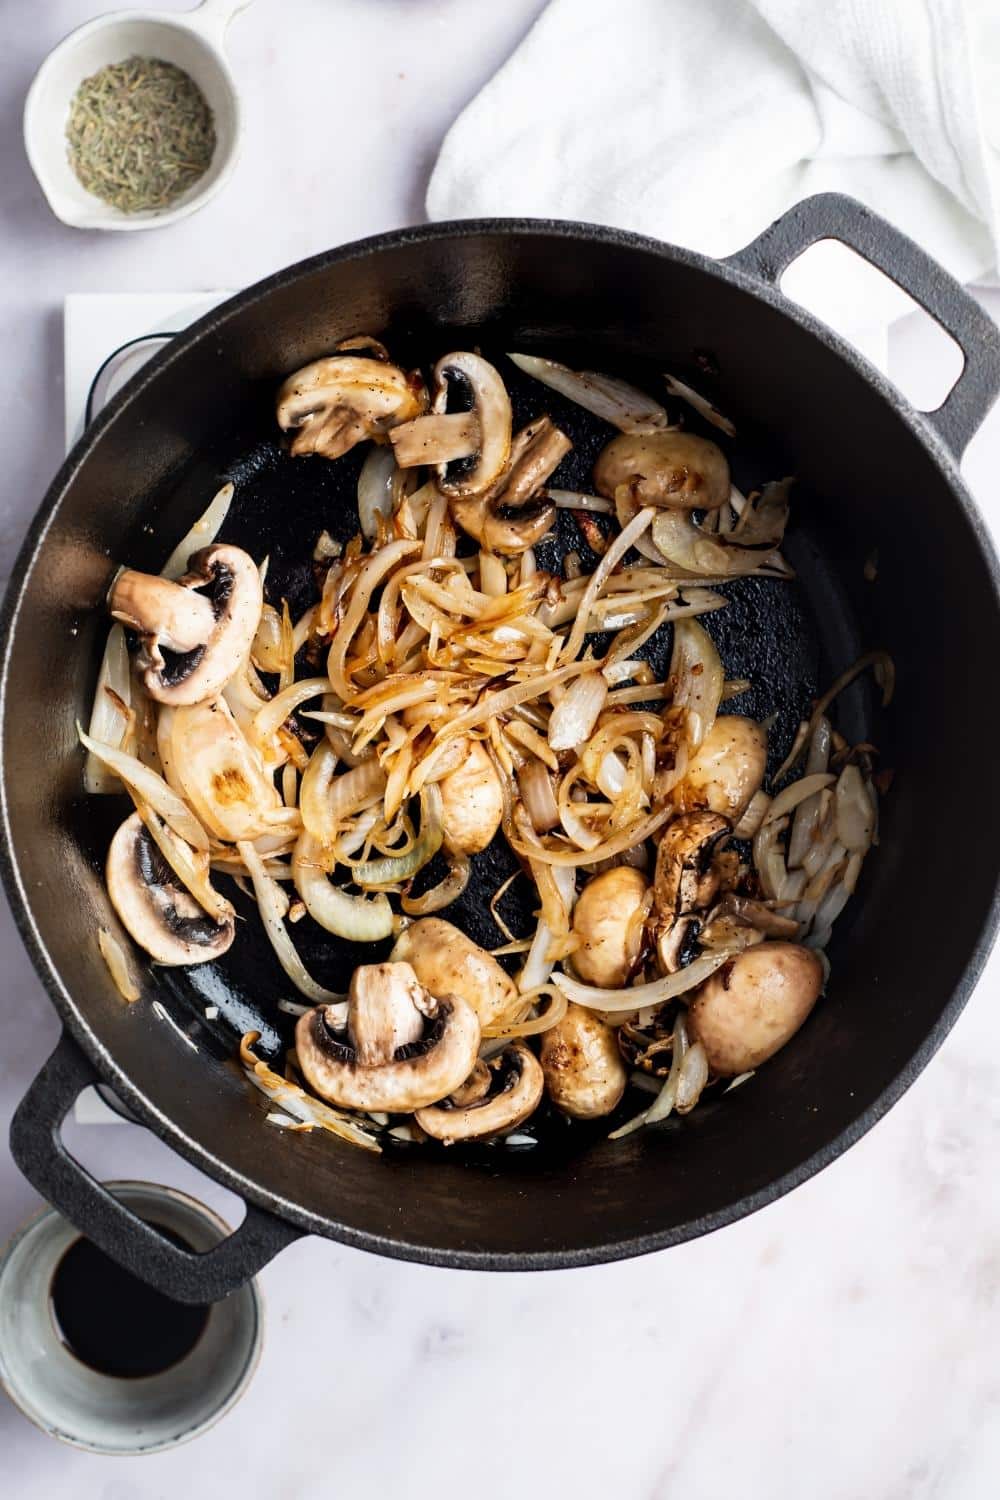 Mushrooms and onions cooking in a Dutch oven.